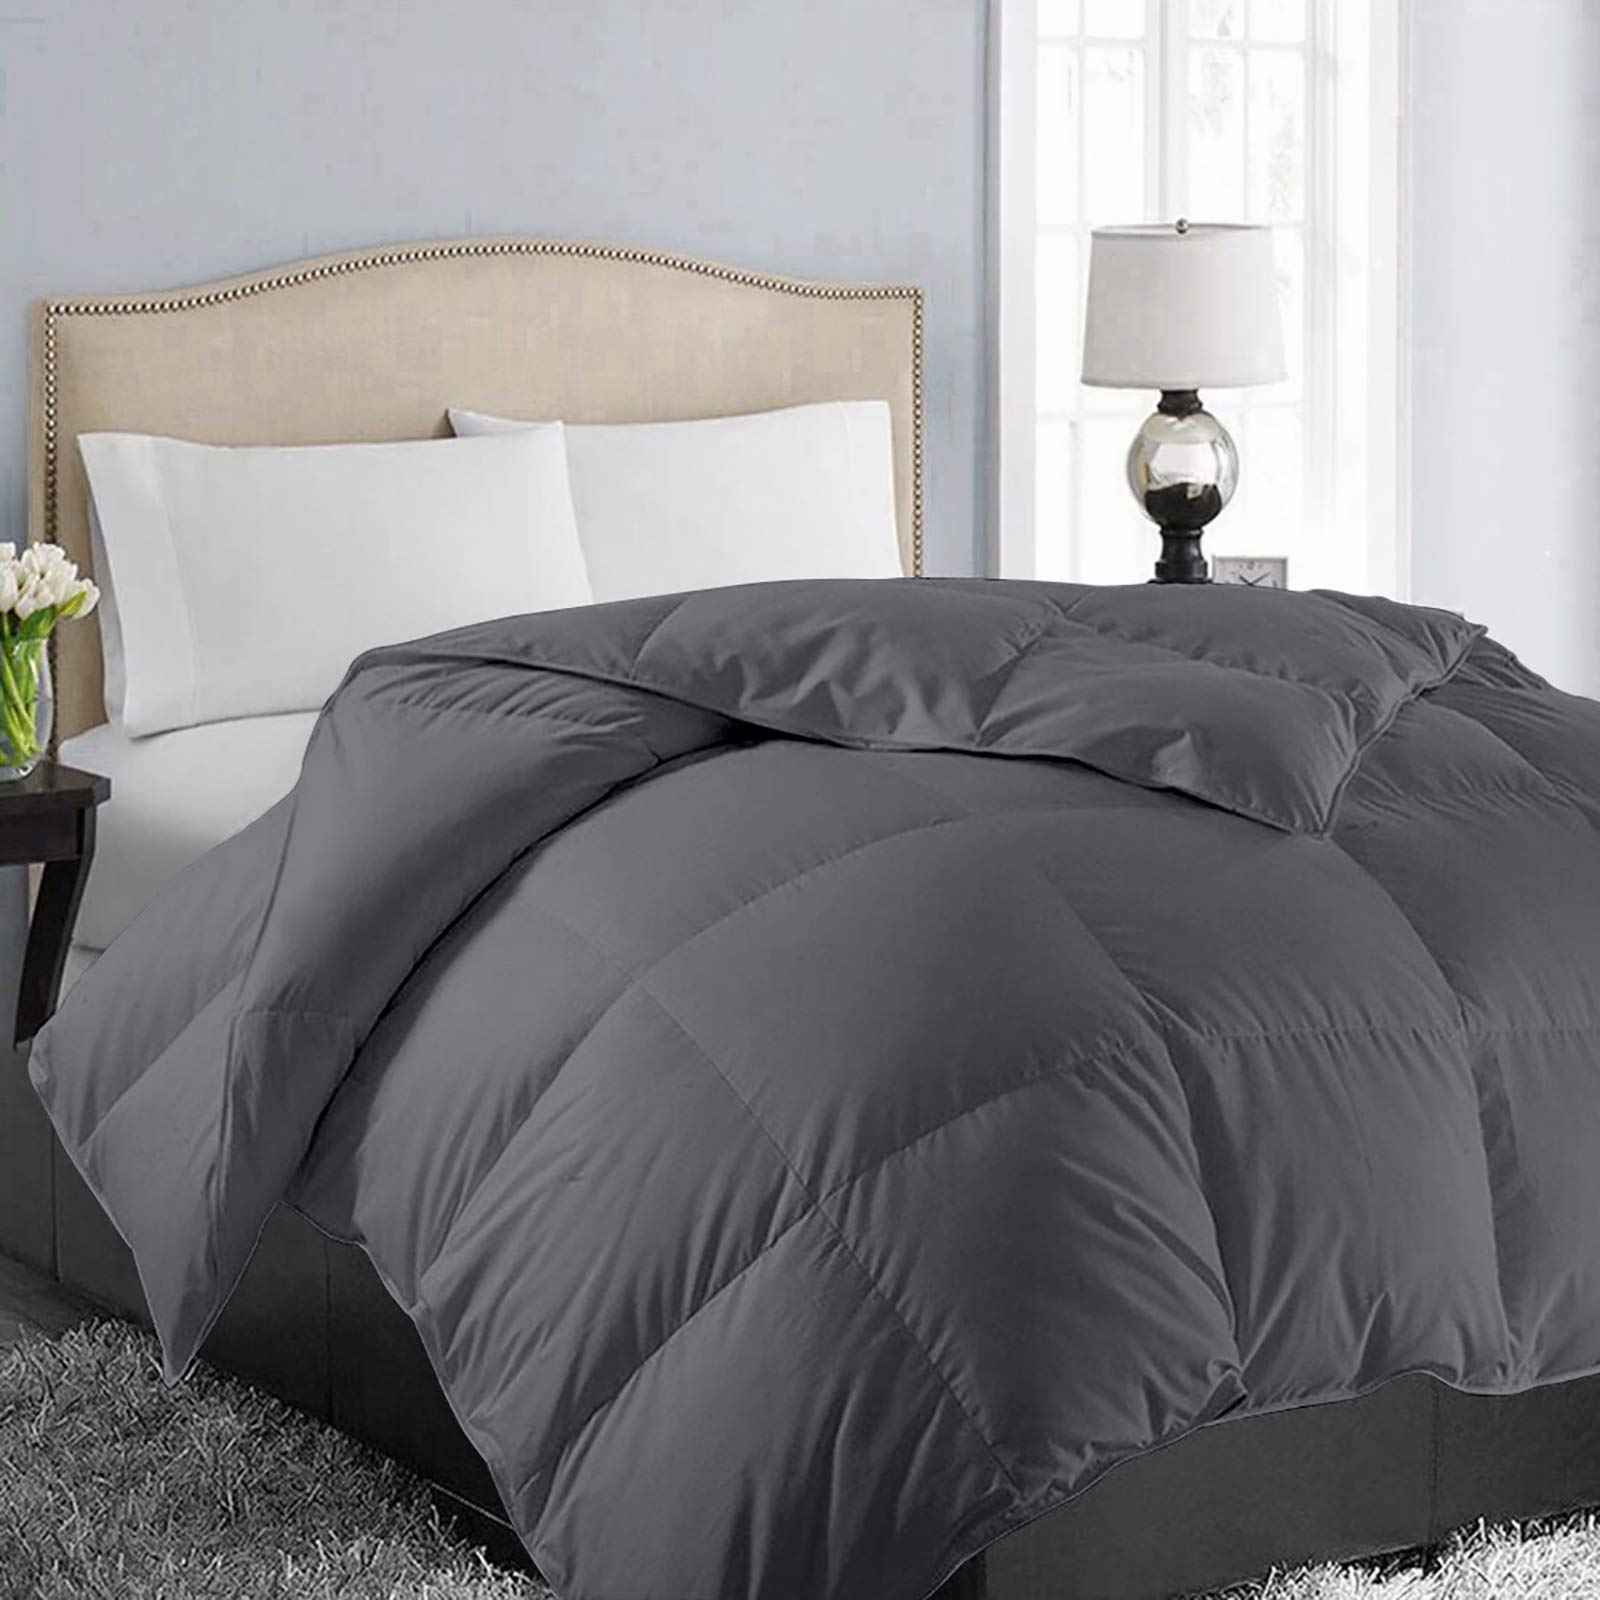 Book Cover EASELAND All Season California King Soft Quilted Down Alternative Comforter Reversible Duvet Insert with Corner Tabs,Winter Summer Warm Fluffy,Dark Grey,96x104 inches California King Dark Grey